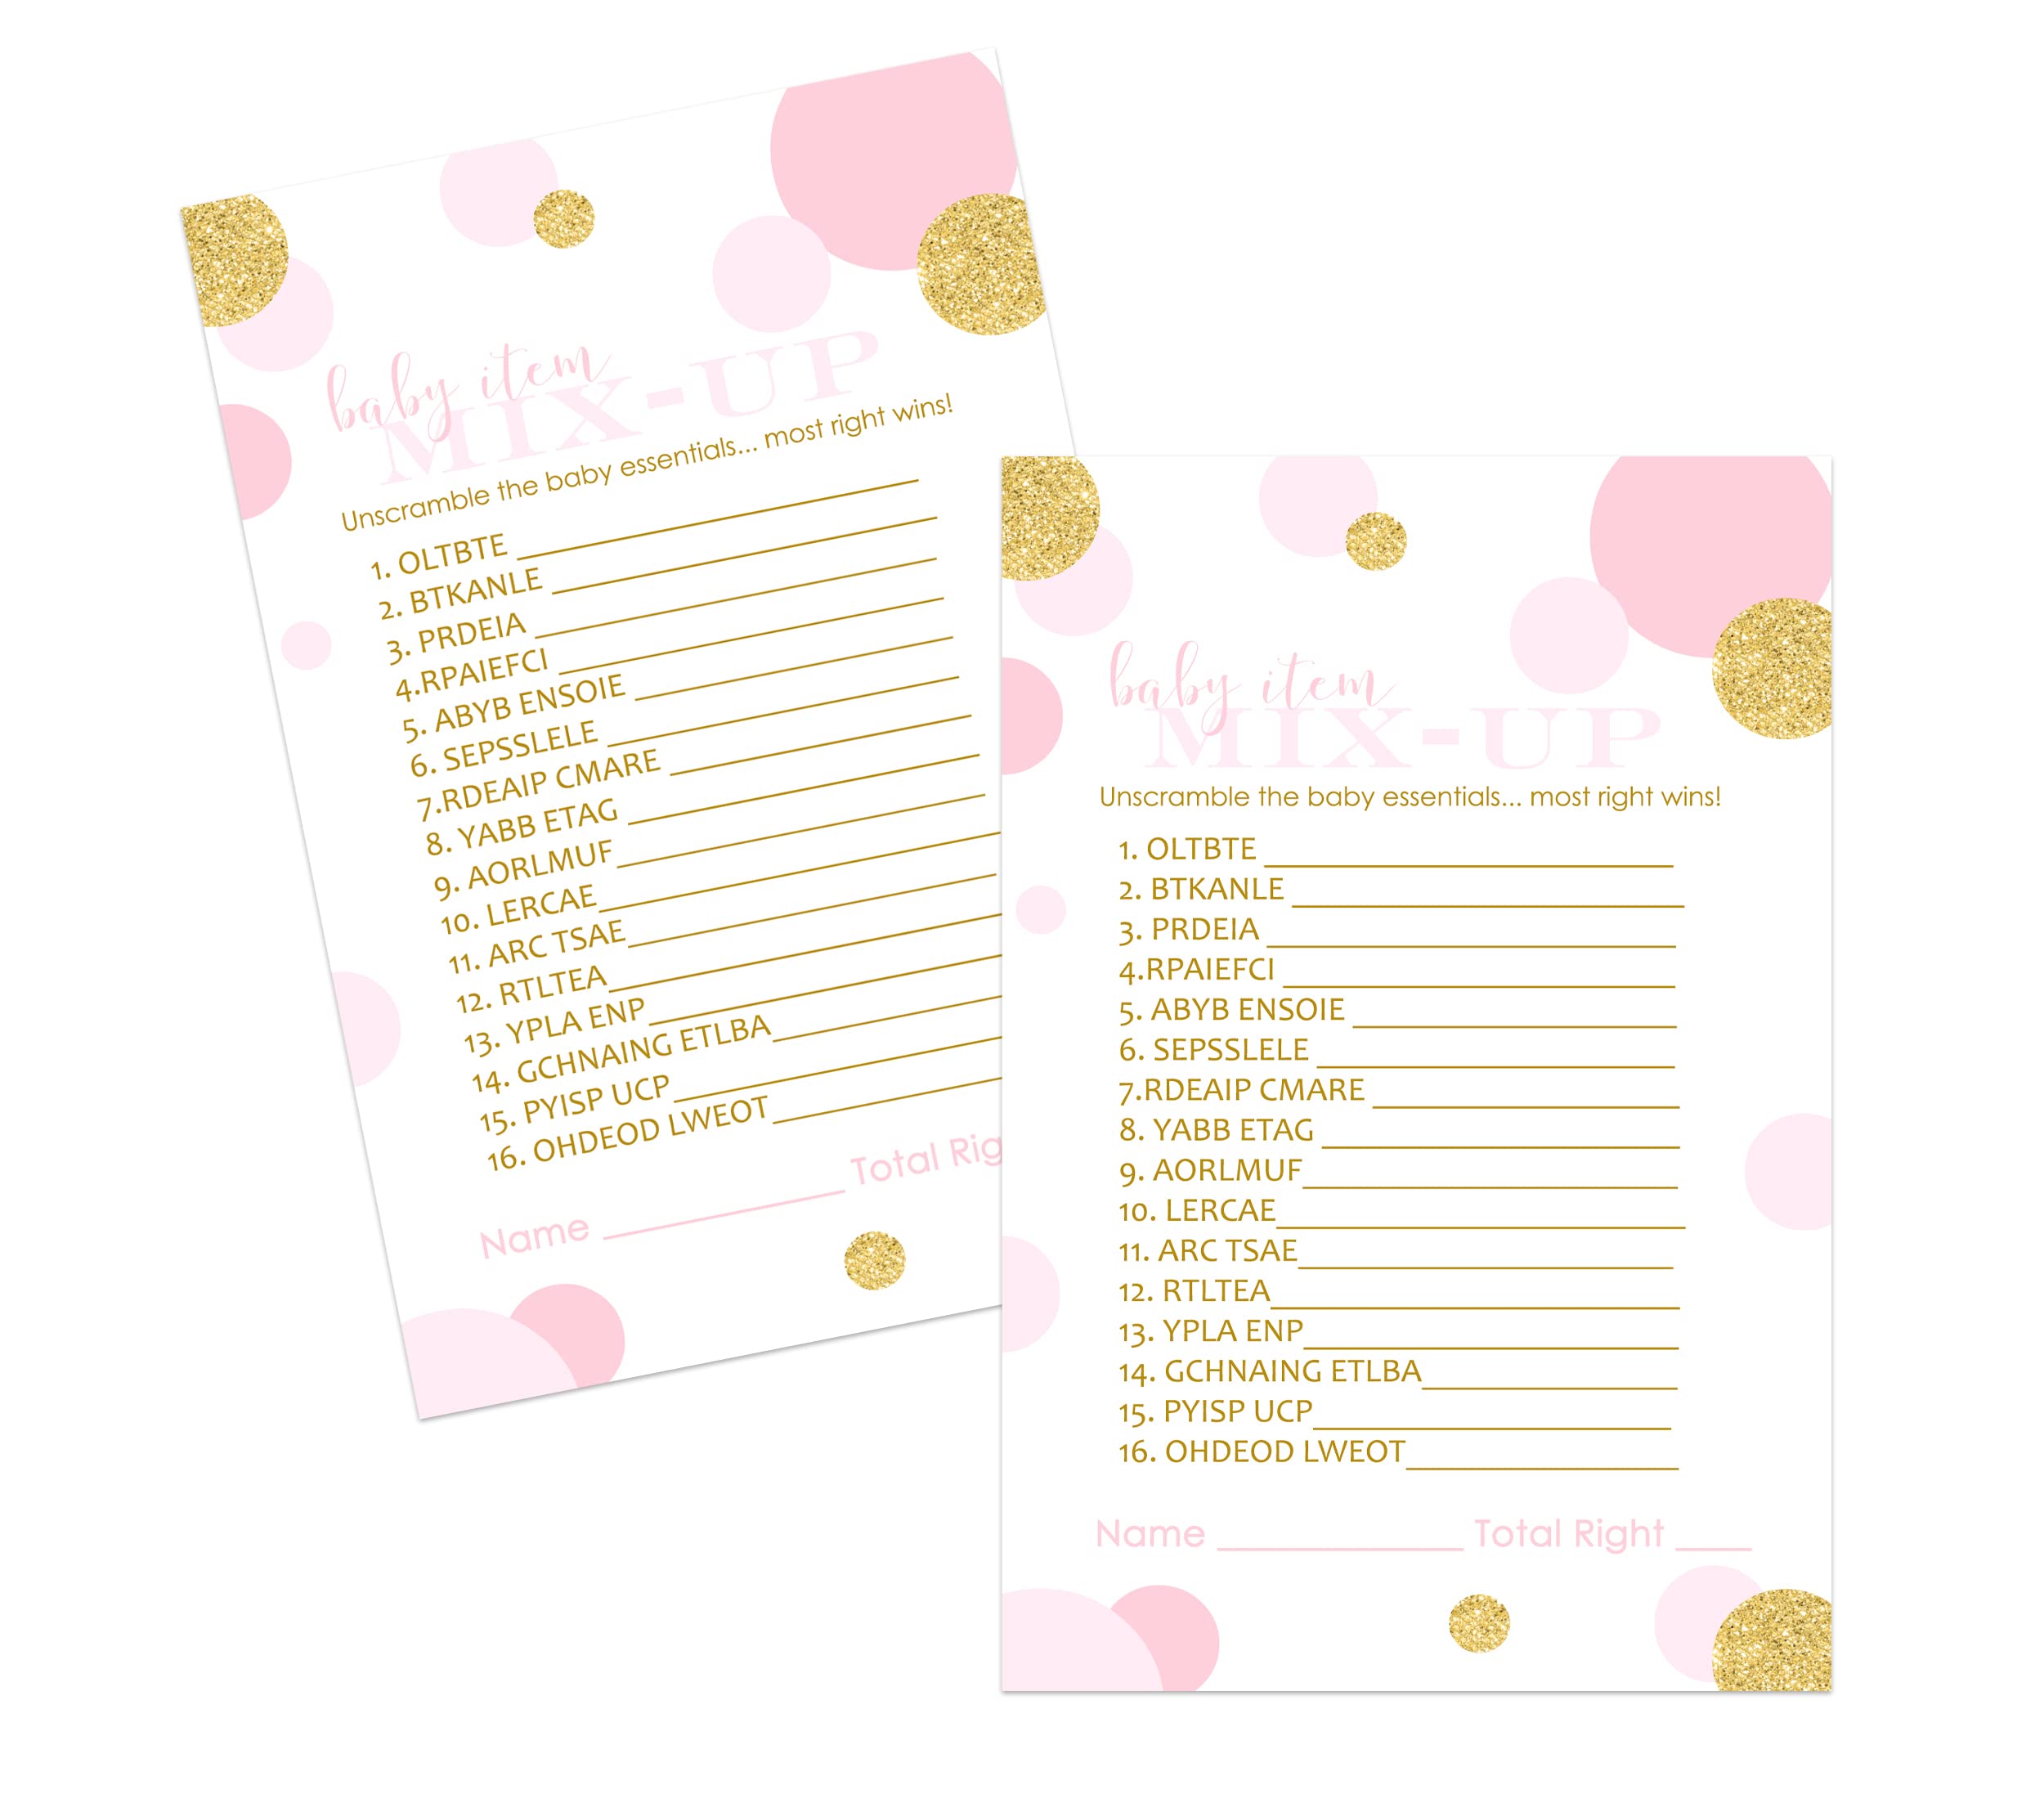 Paper Clever Party Pink and Gold Baby Shower Word Scramble Game for Girls (25 Pack) Unscramble The Phrases Activity Cards Princess Favors Twinkle Little Star Event Supply 4x6 Printed Set